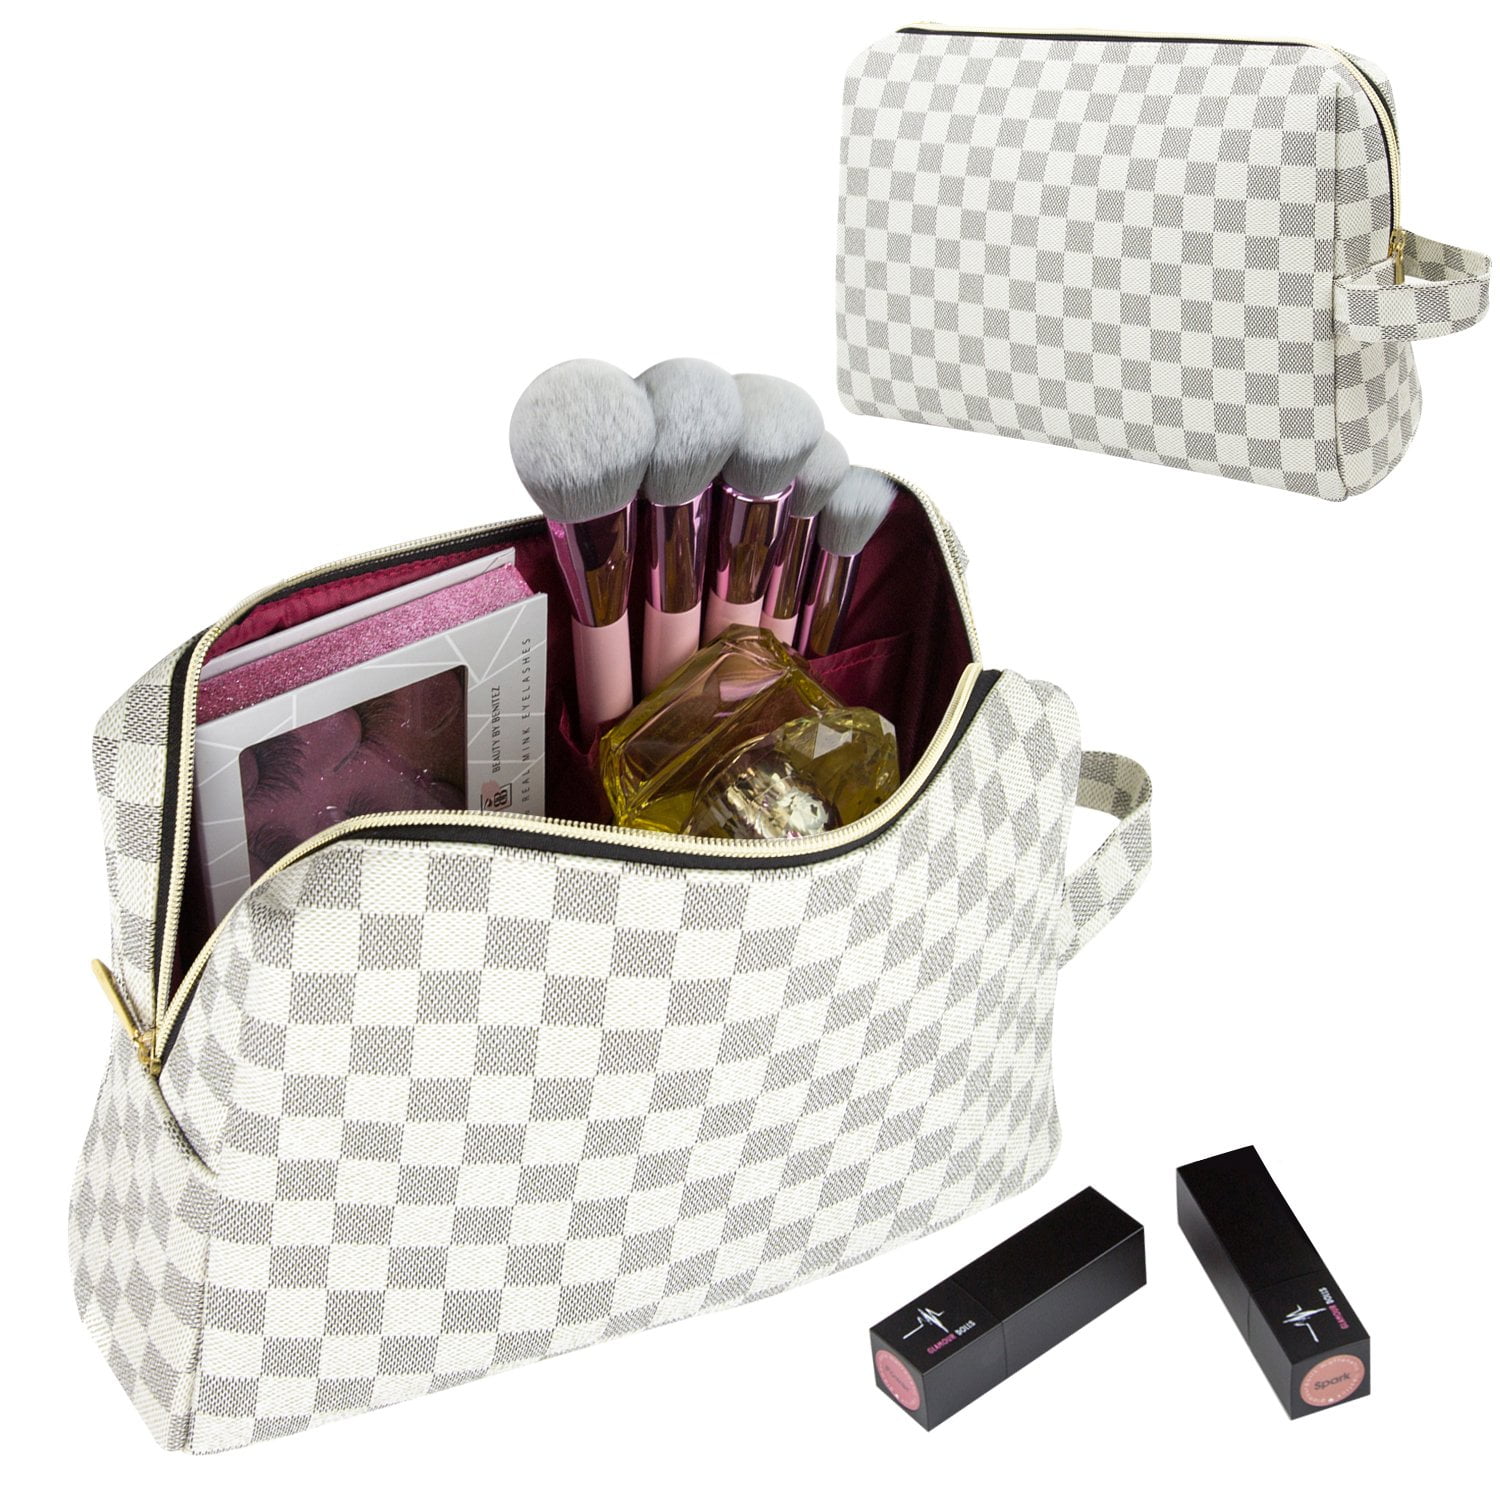 T.Sheep Makeup Bag Checkered Cosmetic Bag Large Travel Toiletry Organizer  For Women,Cosmetics,Makeup Tools,White